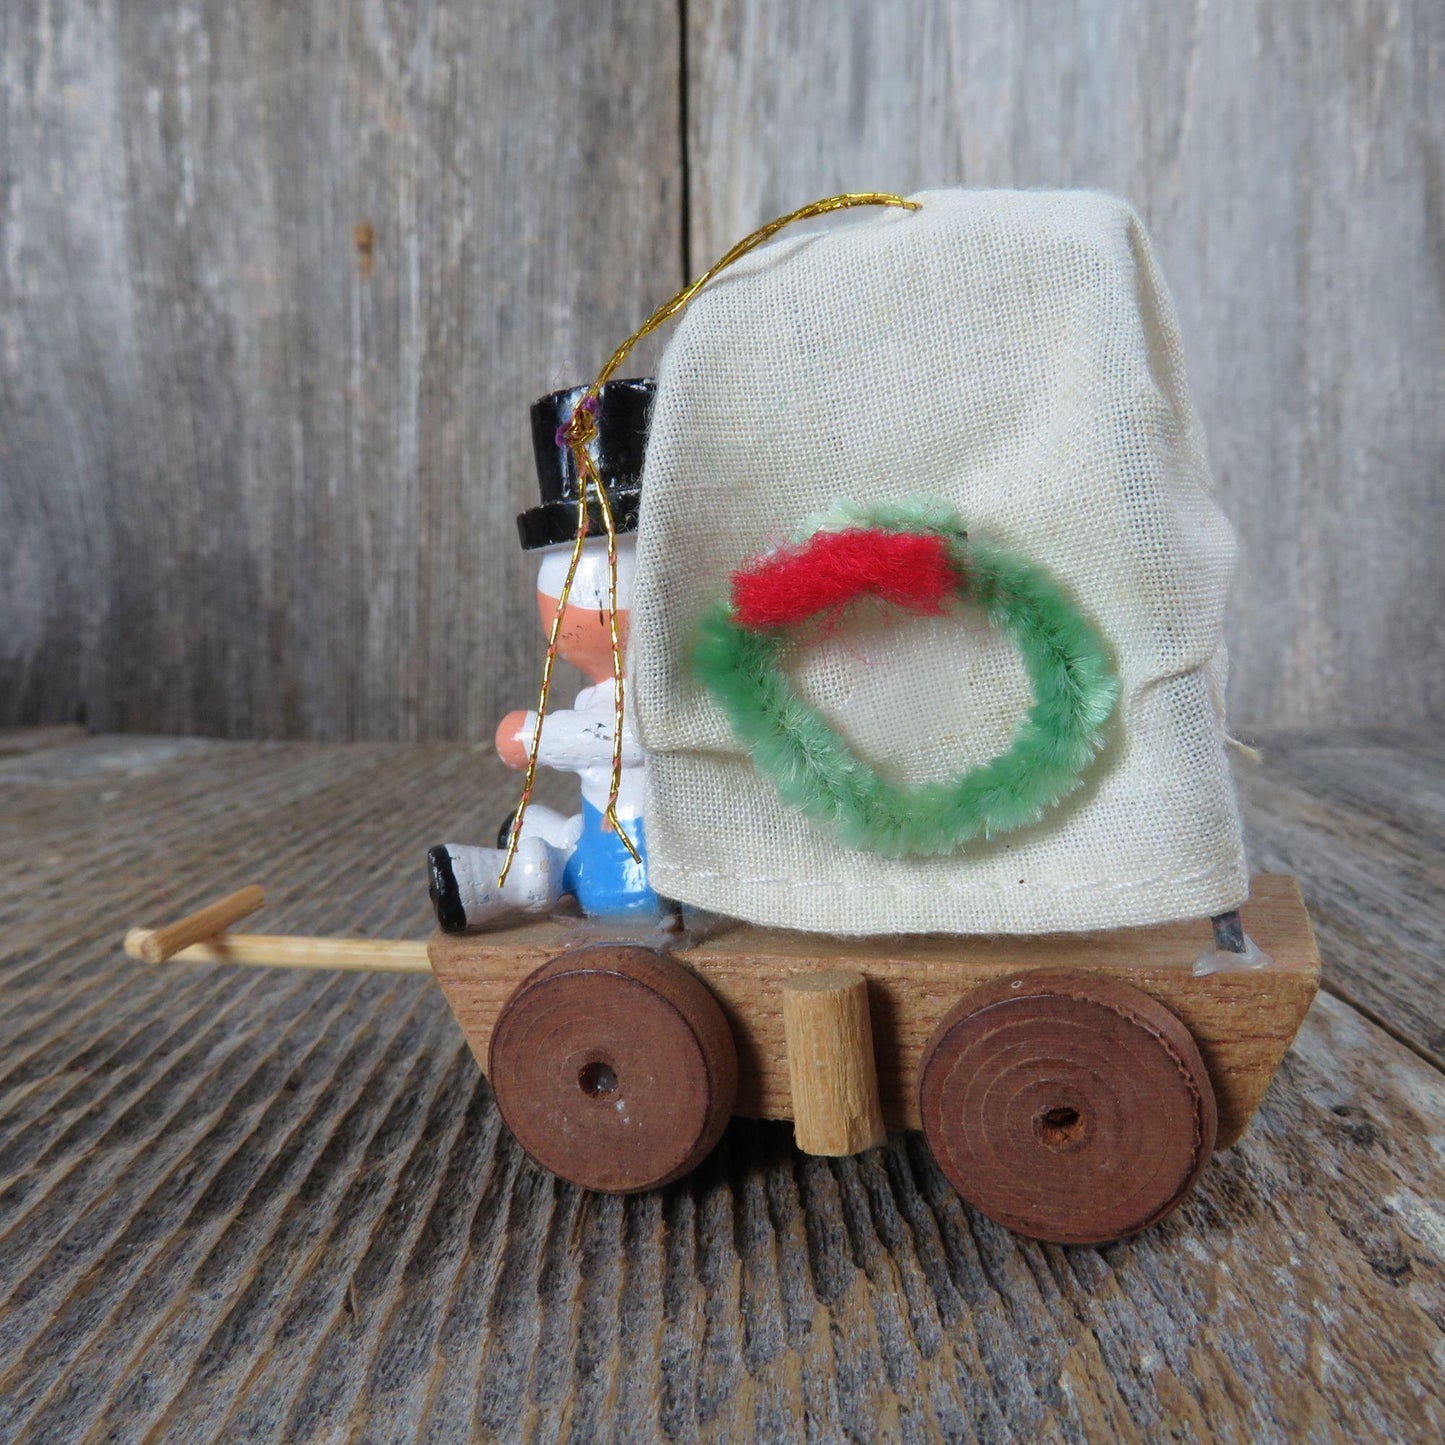 Vintage Chuckwagon Wooden Ornament Christmas Covered Wagon Wood Old West Cowboy